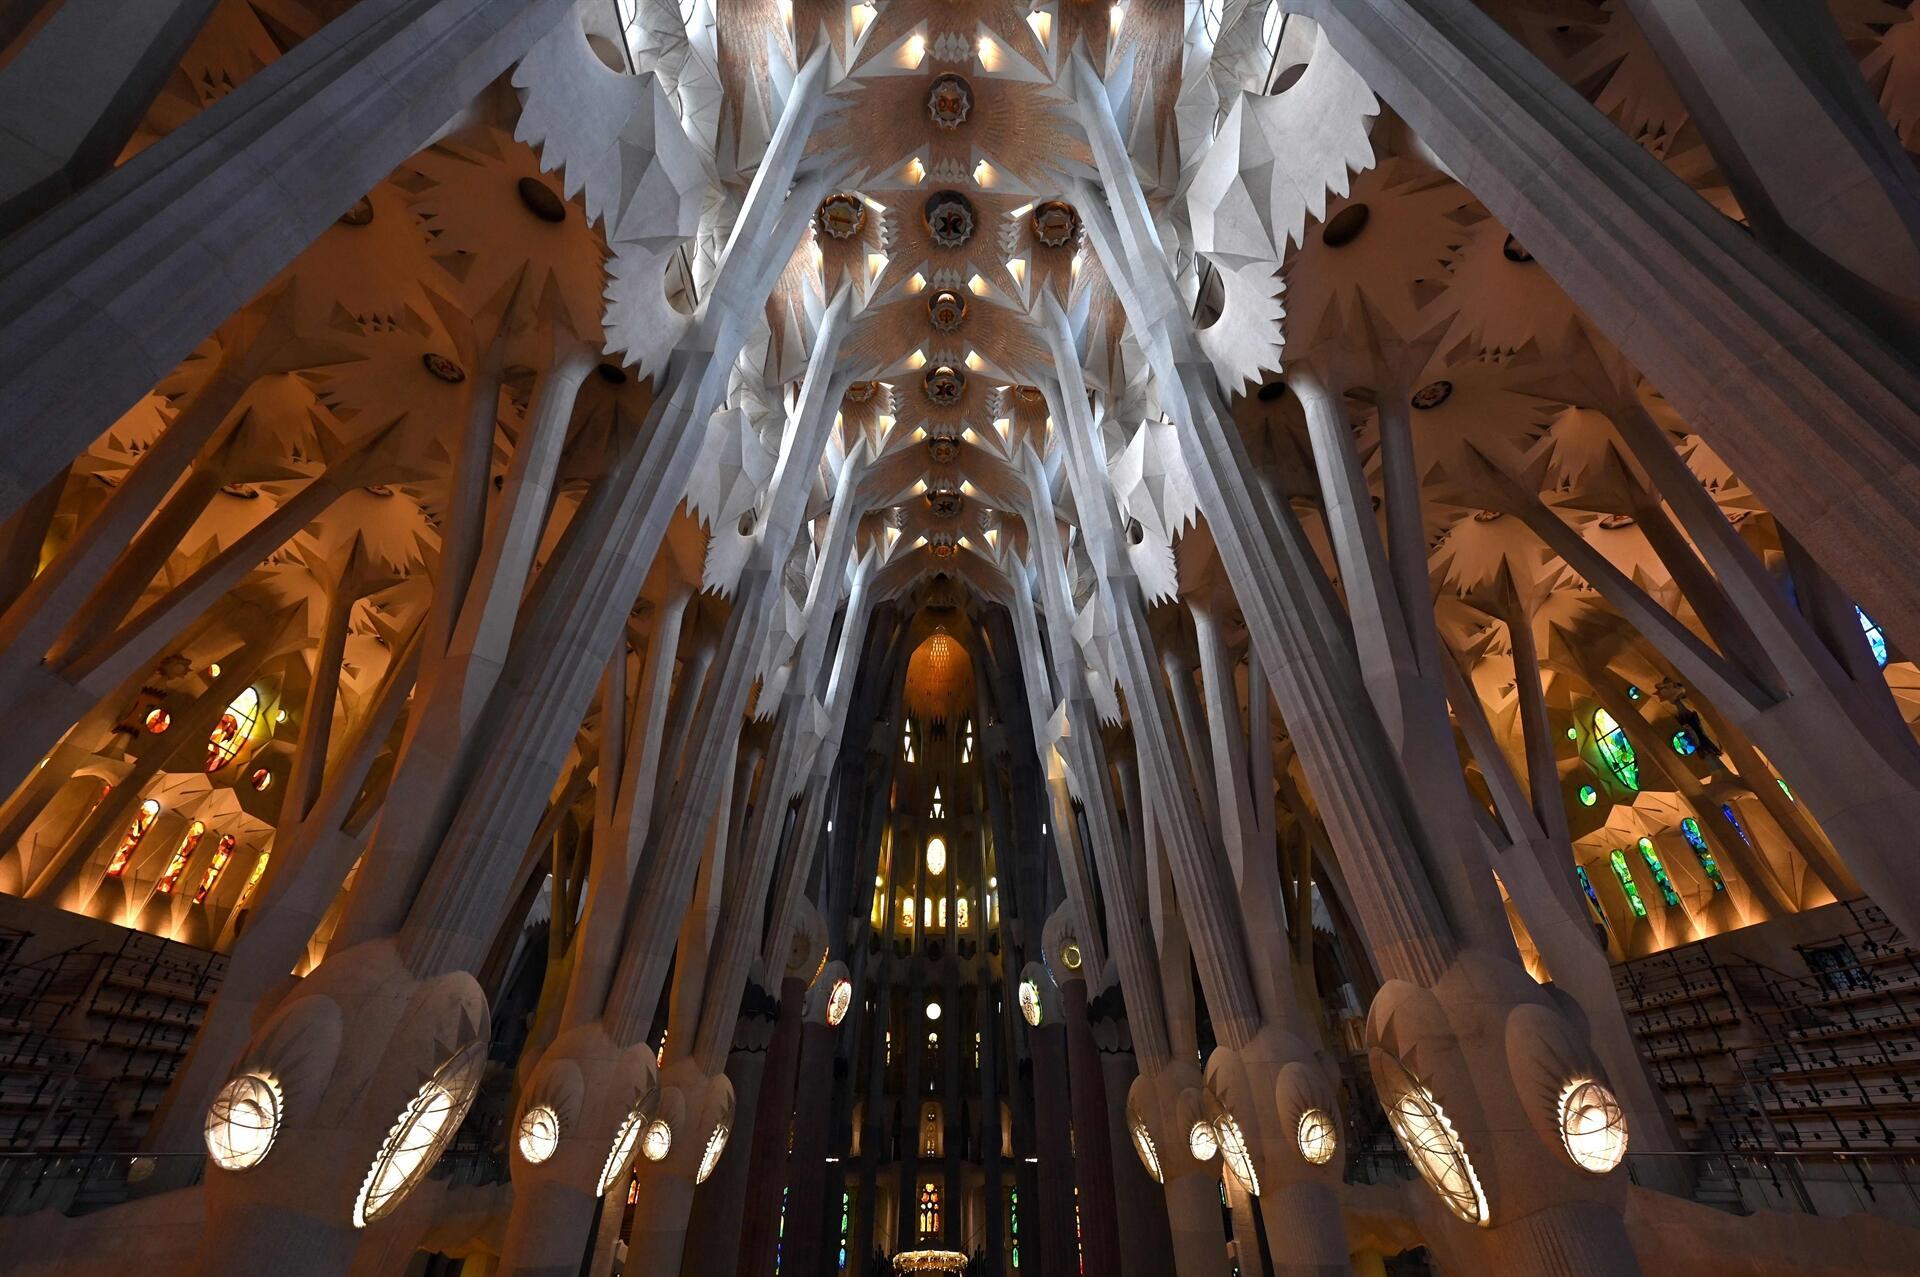 Architect try to finish Sagrada Familia after 138 years